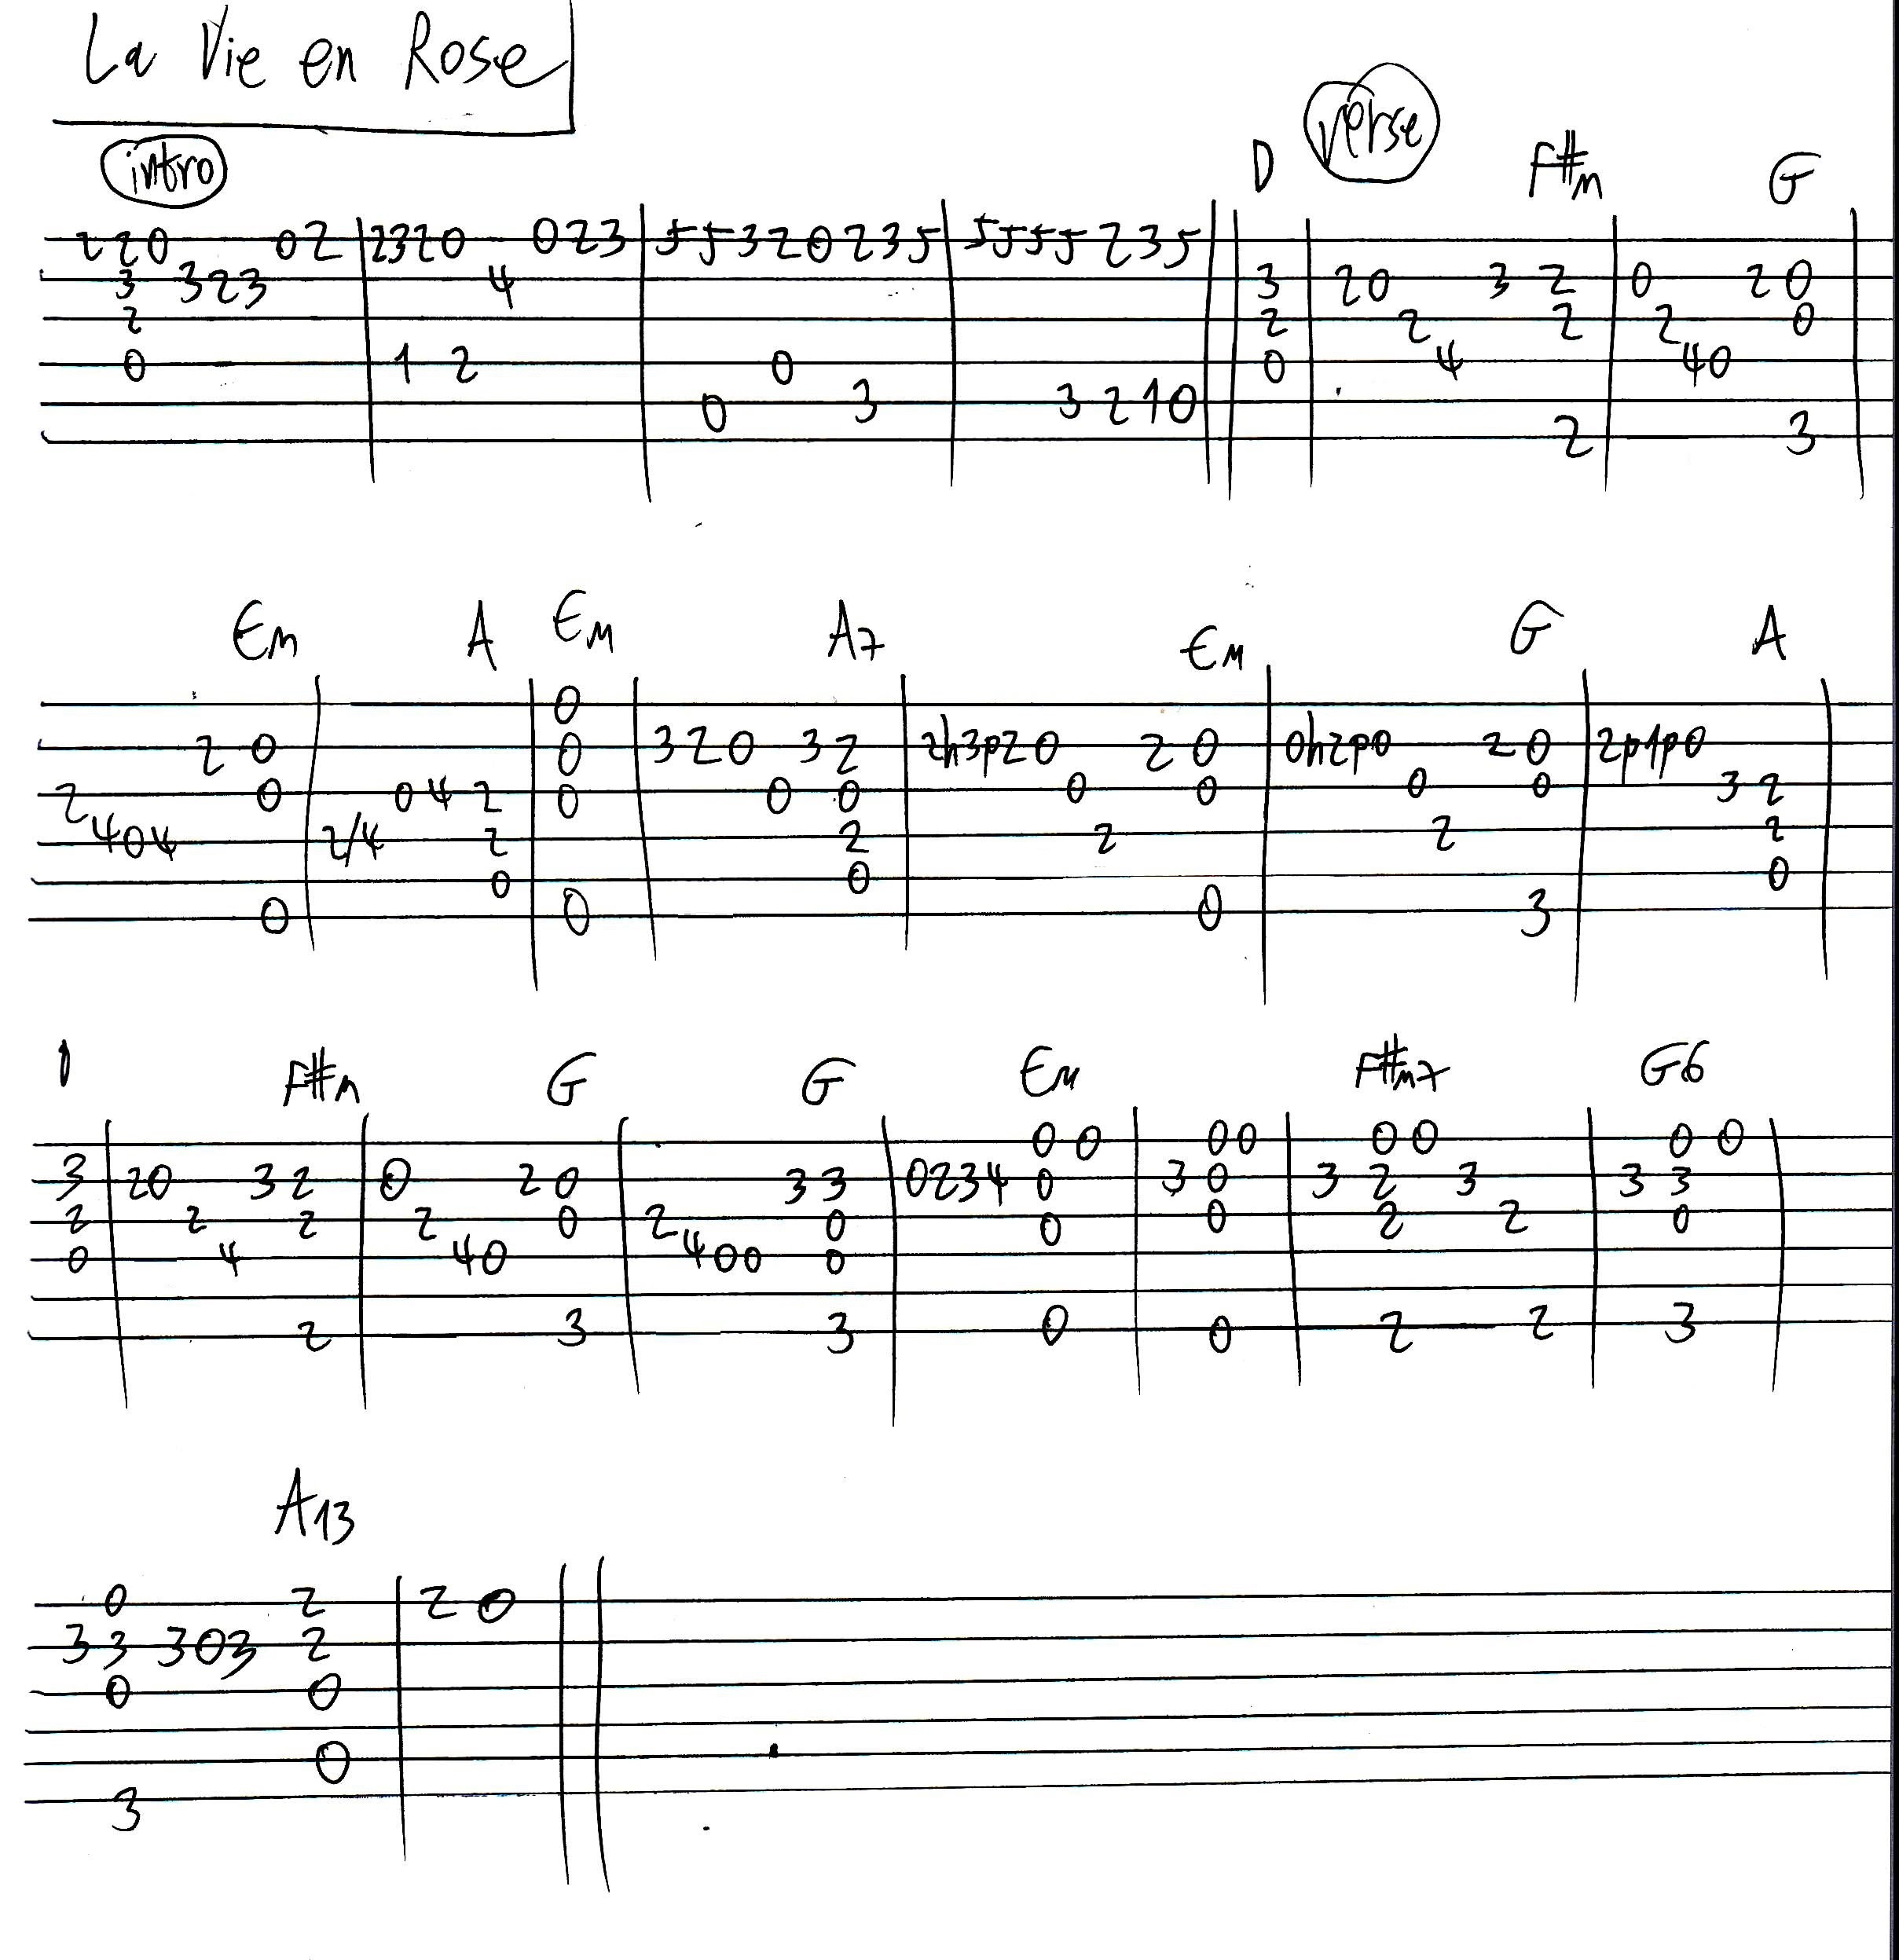 La Vie En Rose Chords French Sheet And Chords Collection g e f#m b g#m a f# c# ➧ chords for la vie en rose with capo transposer, play along with guitar, piano, ukulele & mandolin. la vie en rose chords french sheet